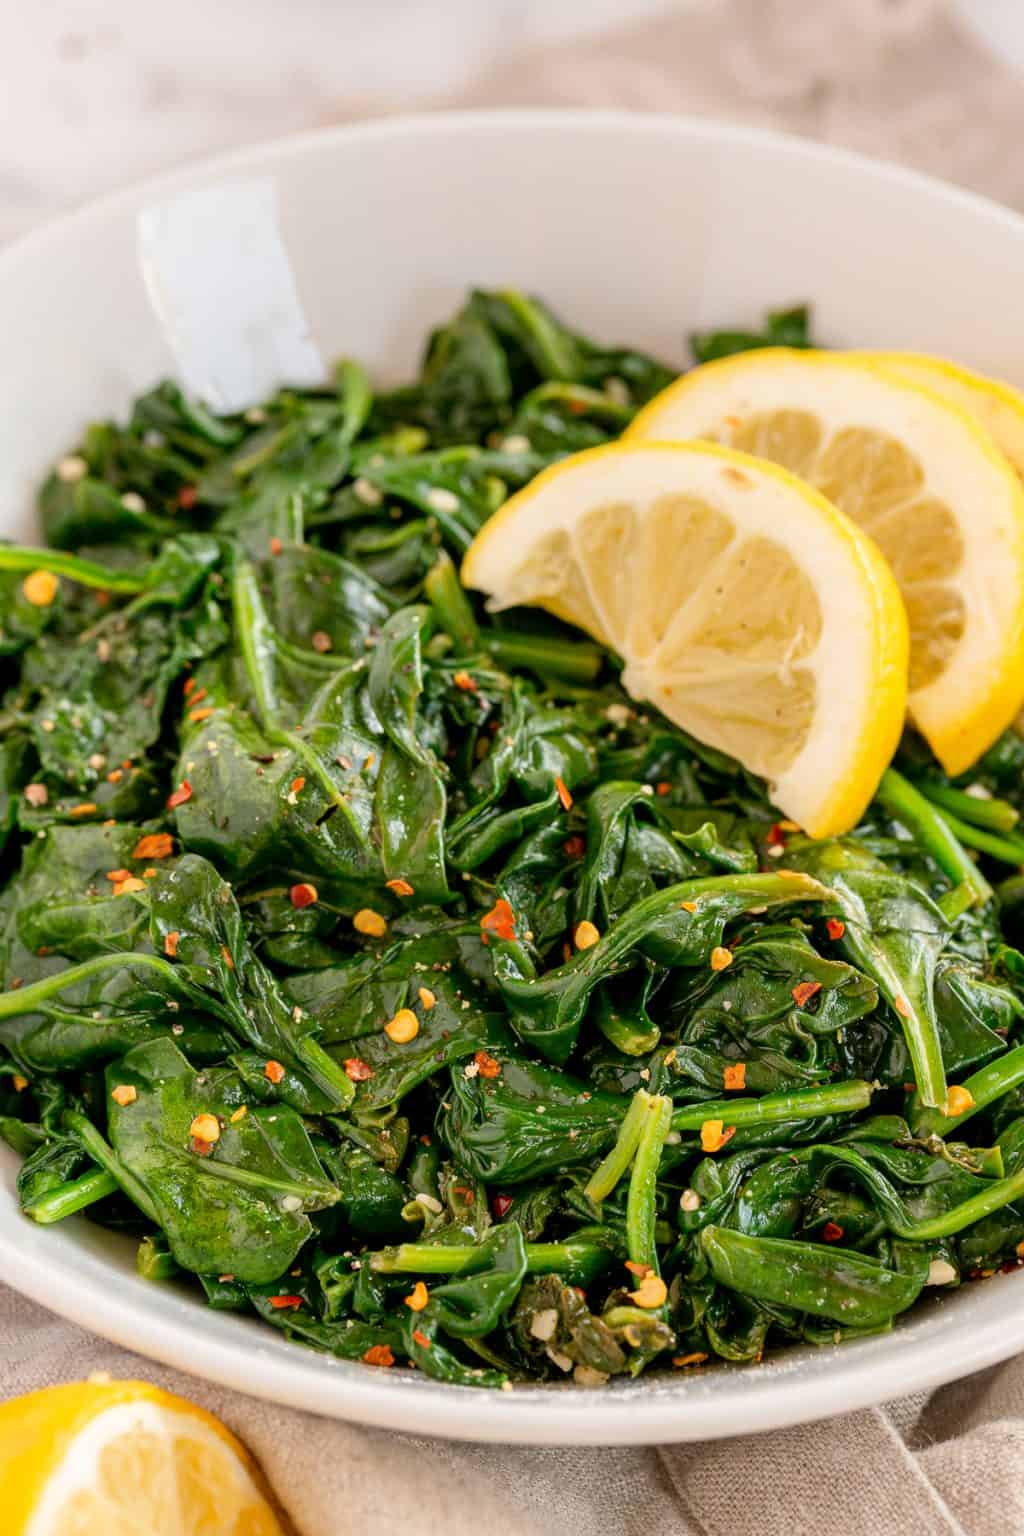 bowl of sautéed spinach with red pepper flakes to add a bit of heat.